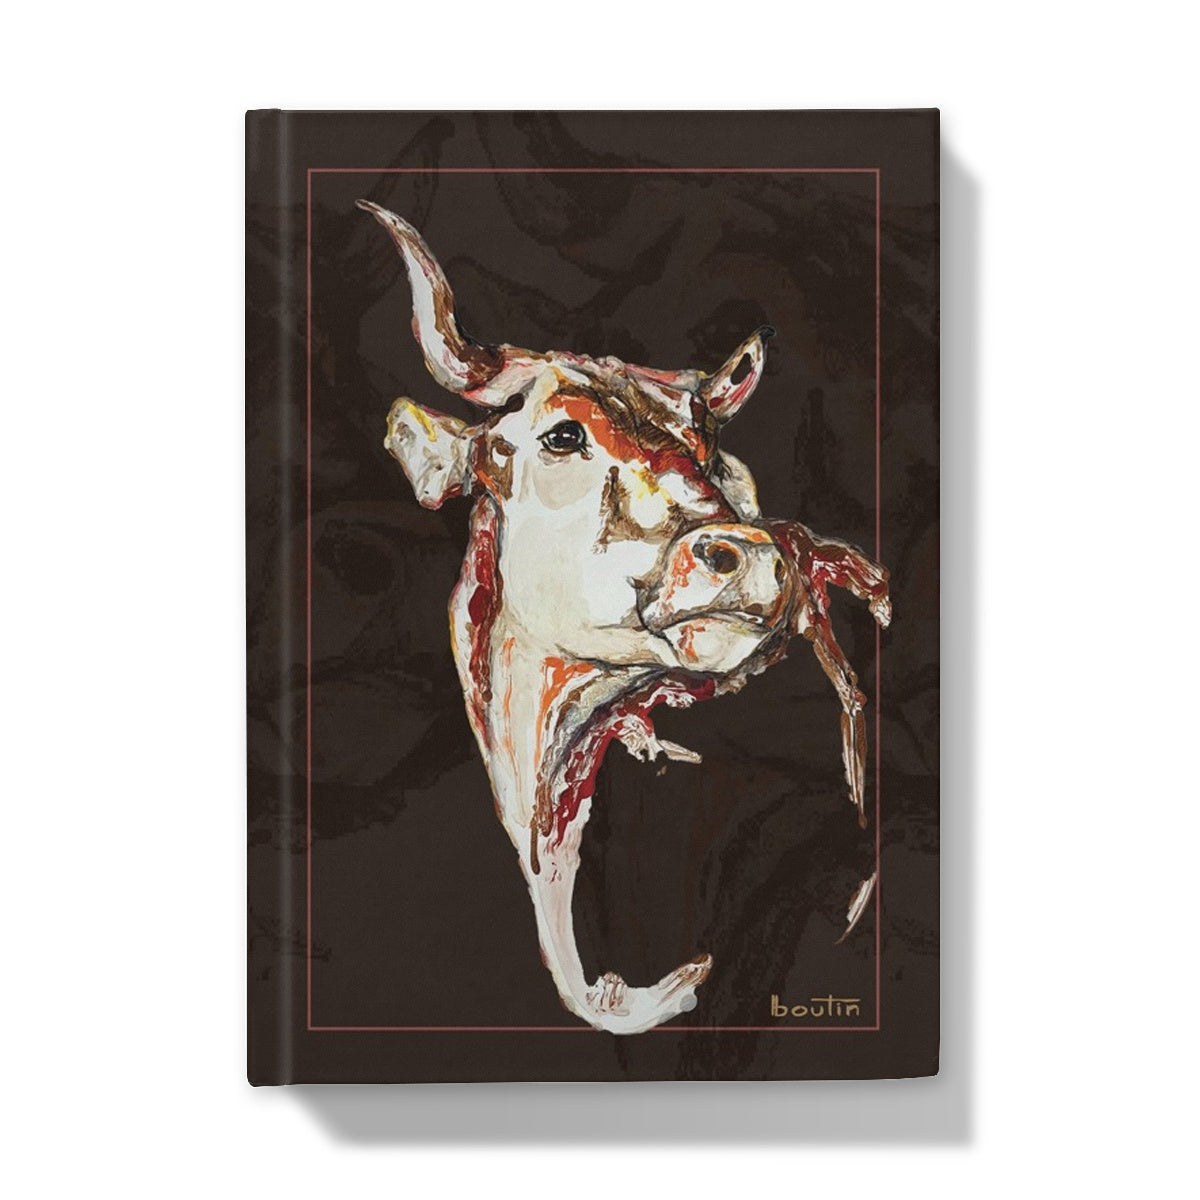 Brown Bob - Notebook by the artist Boutin